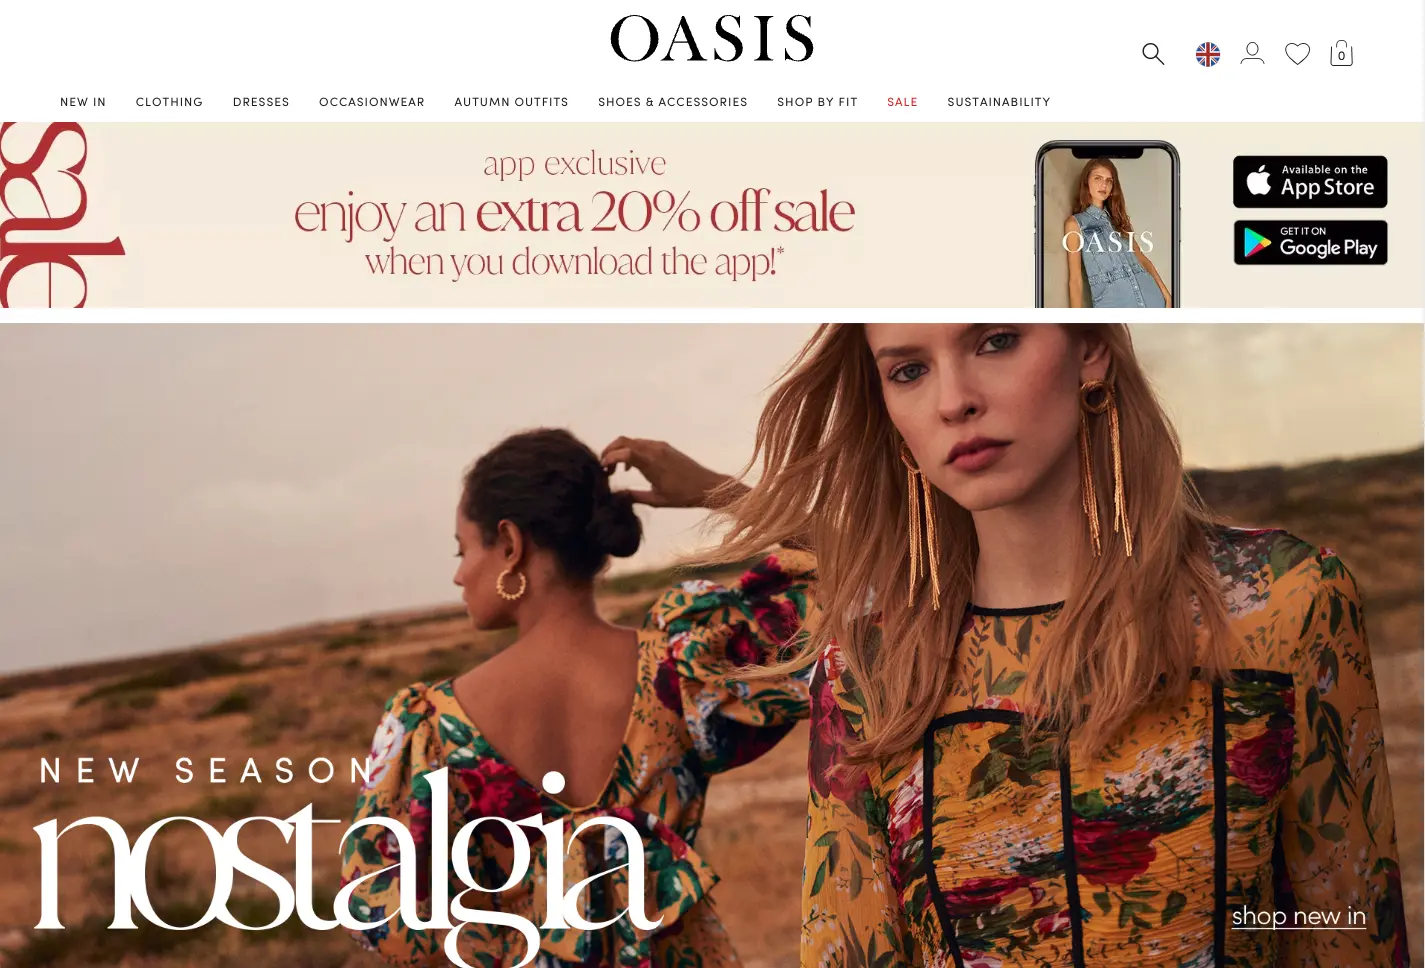 Oasis - excellent customer and omnichannel service